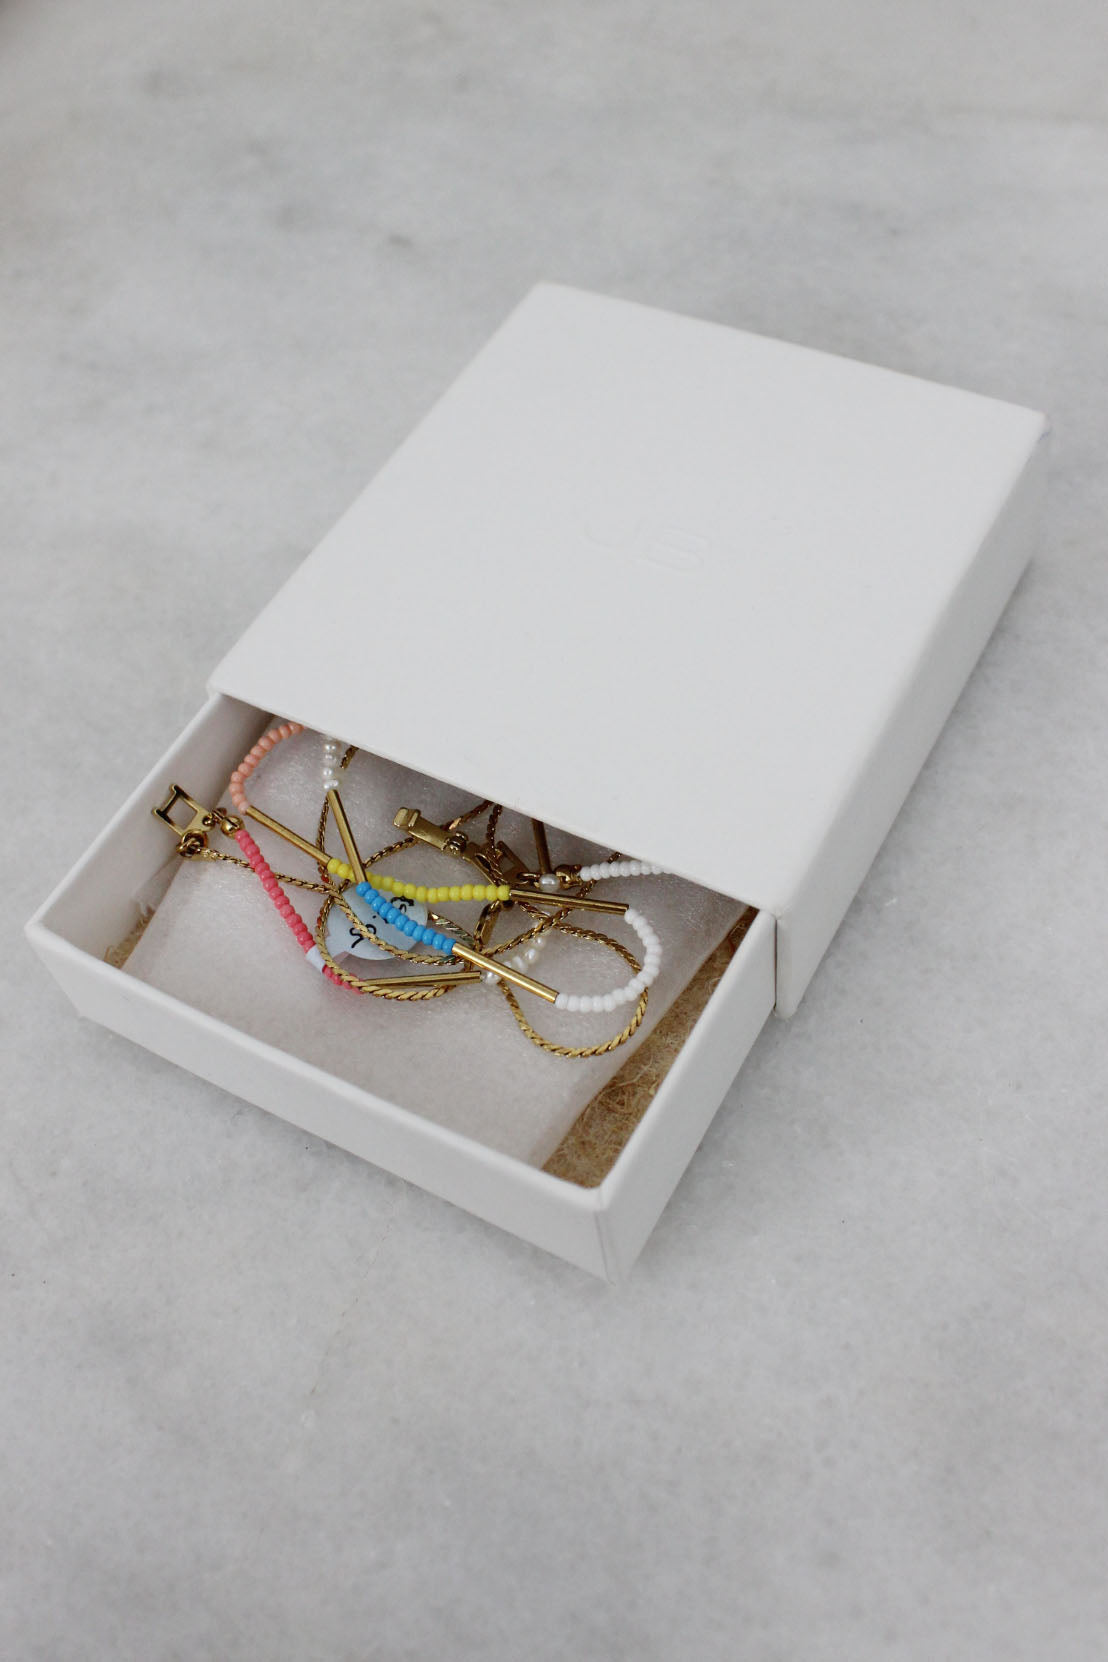 necklace and box.